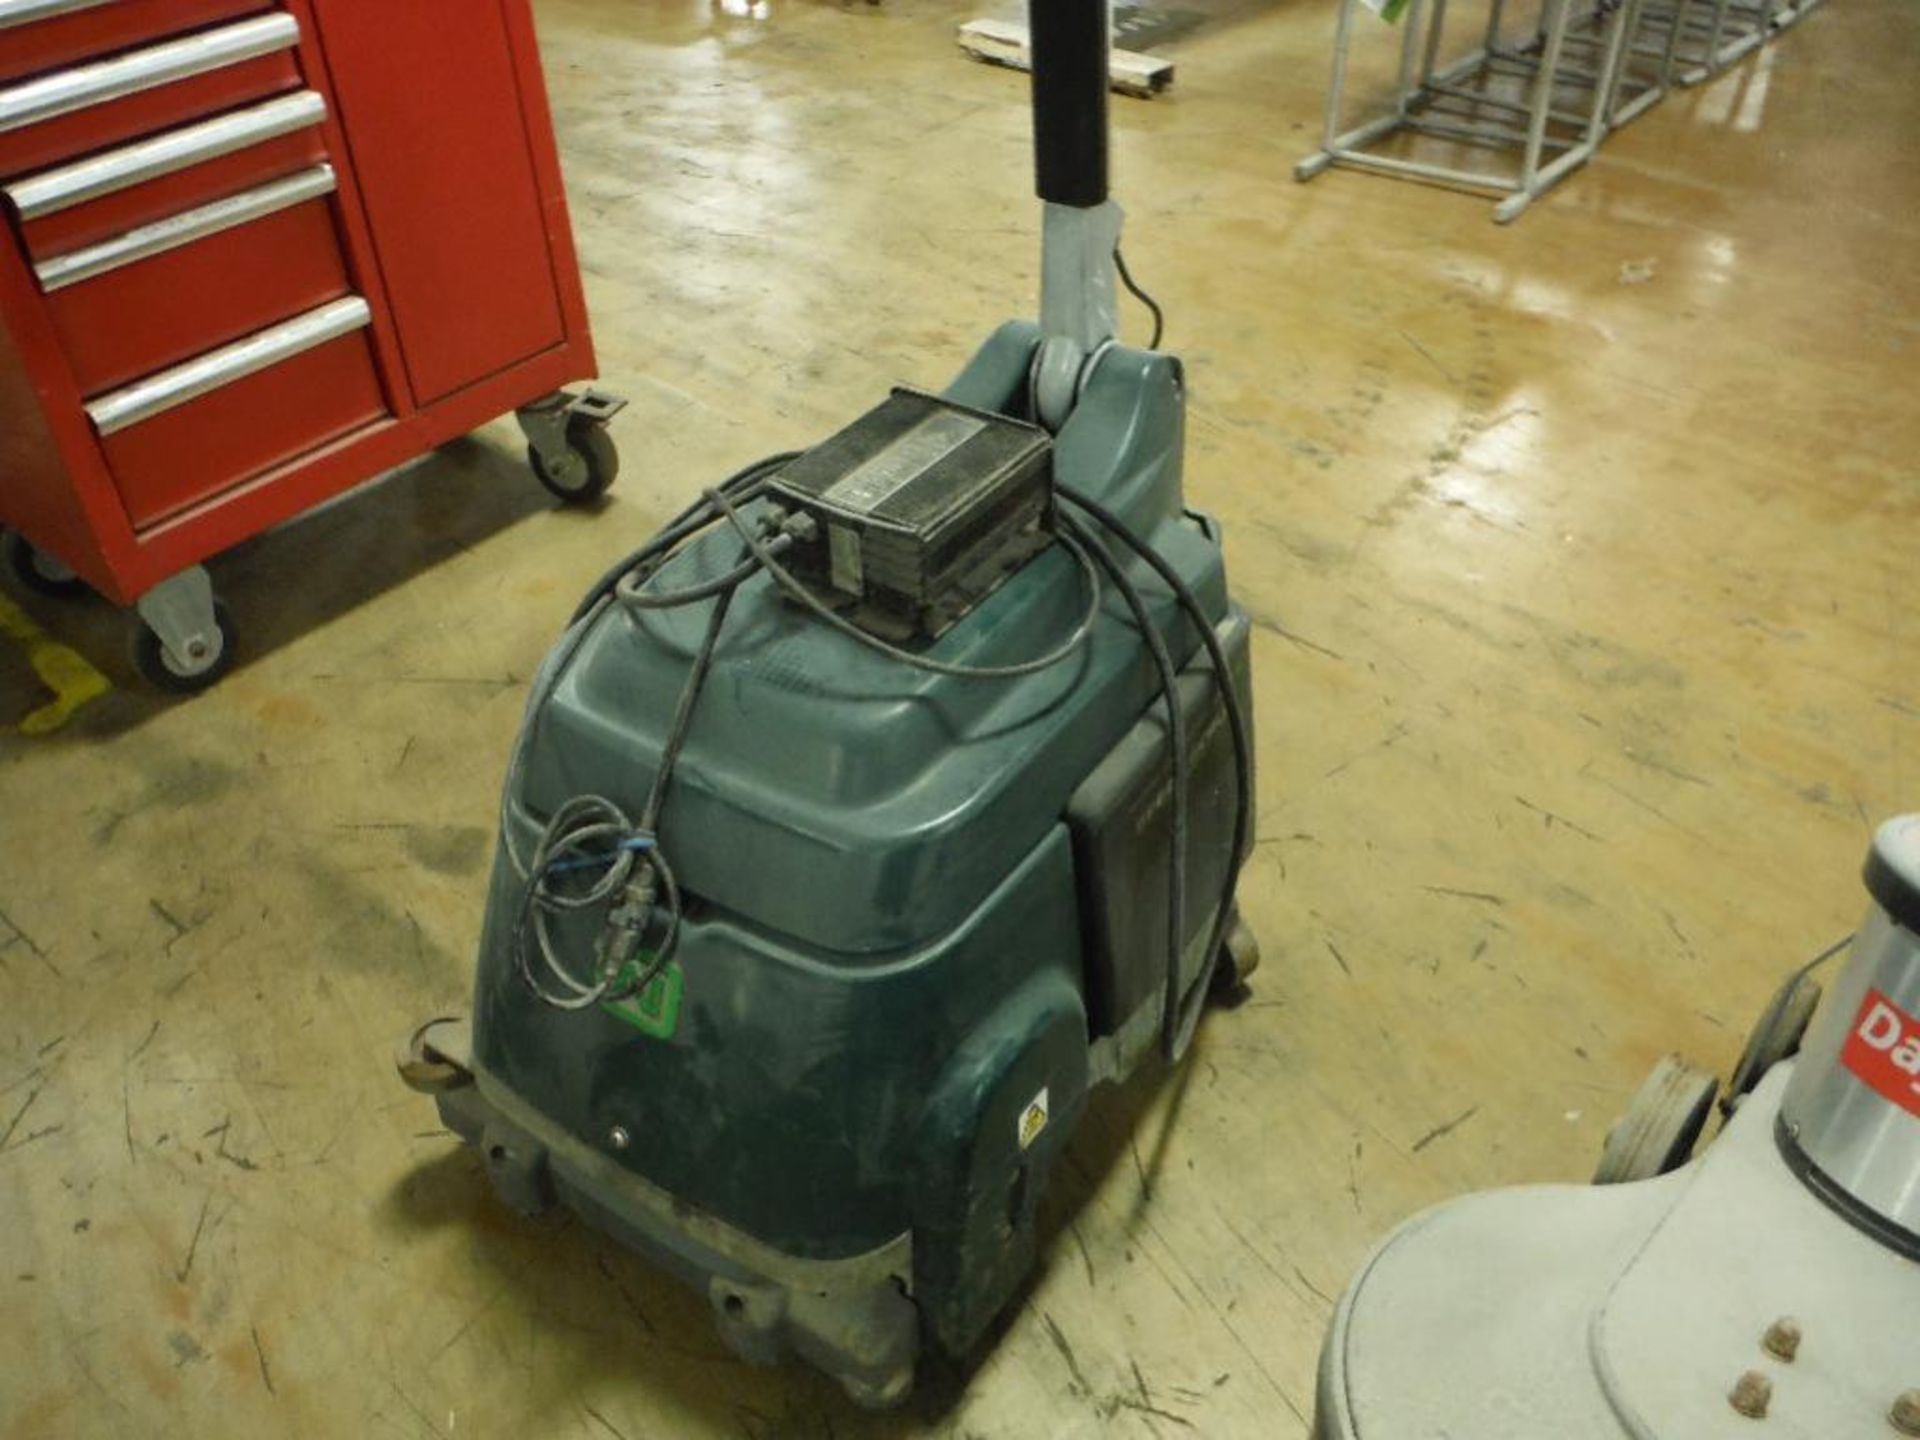 Nobles floor scrubber, Model Speed Scrubber, w/ charger. Rigging Fee: $25